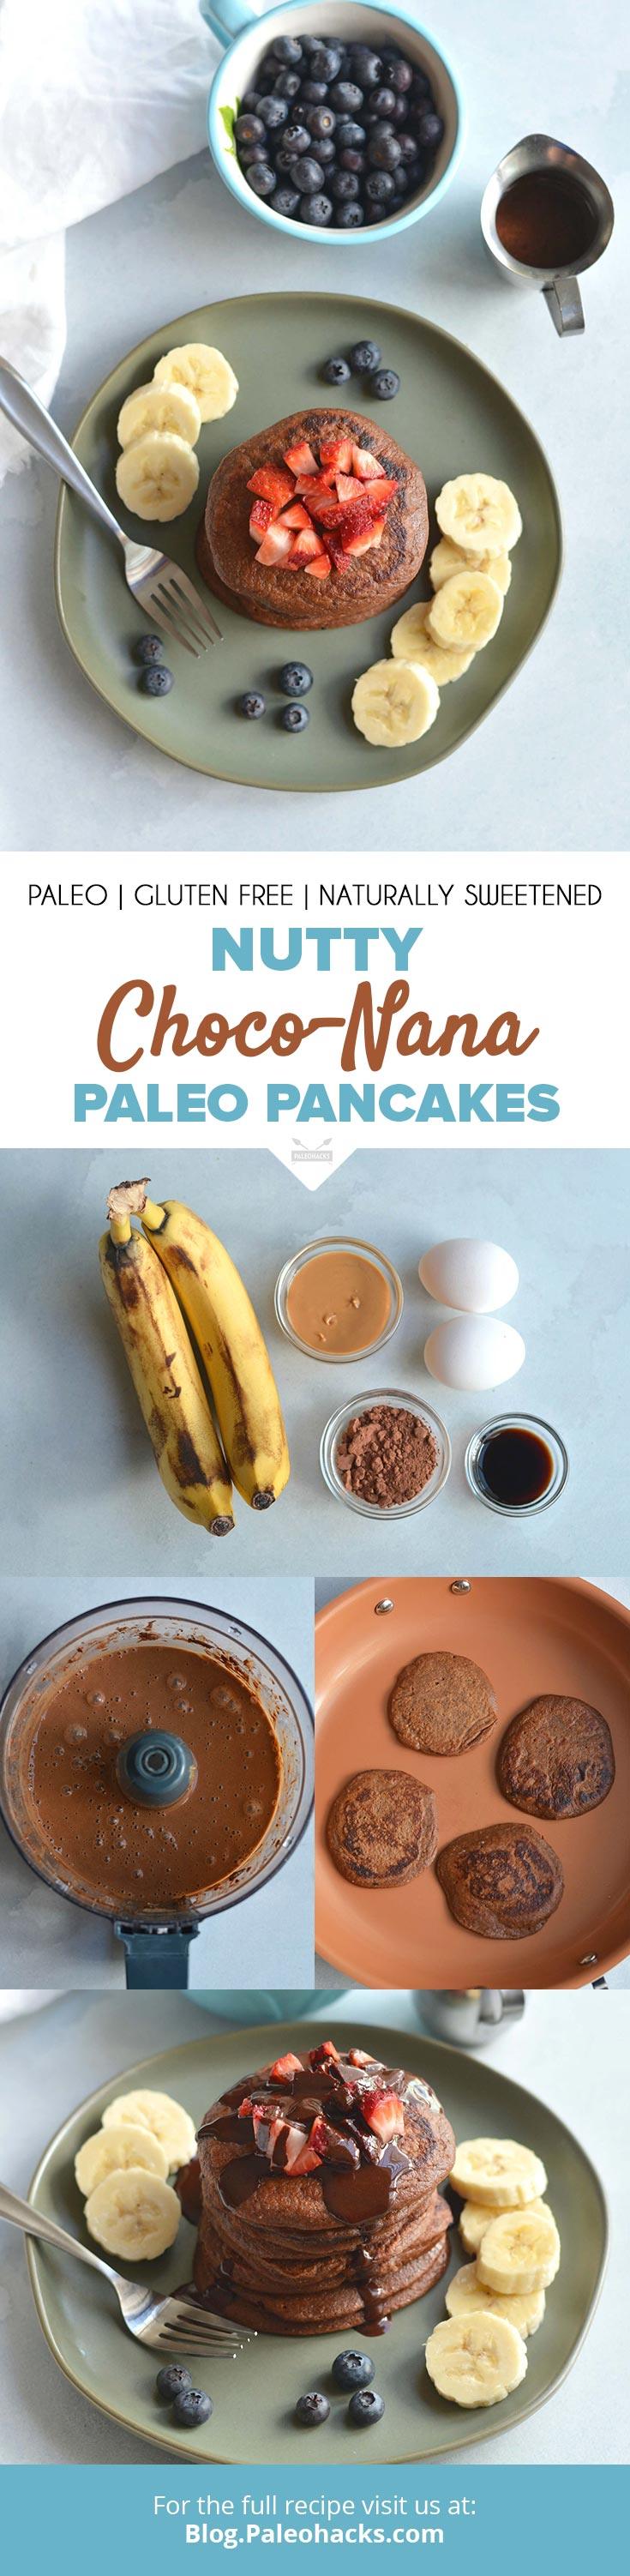 Craving chocolate in the morning? Try these Nutty Choco-Nana Paleo Pancakes you can make in just 15 minutes.